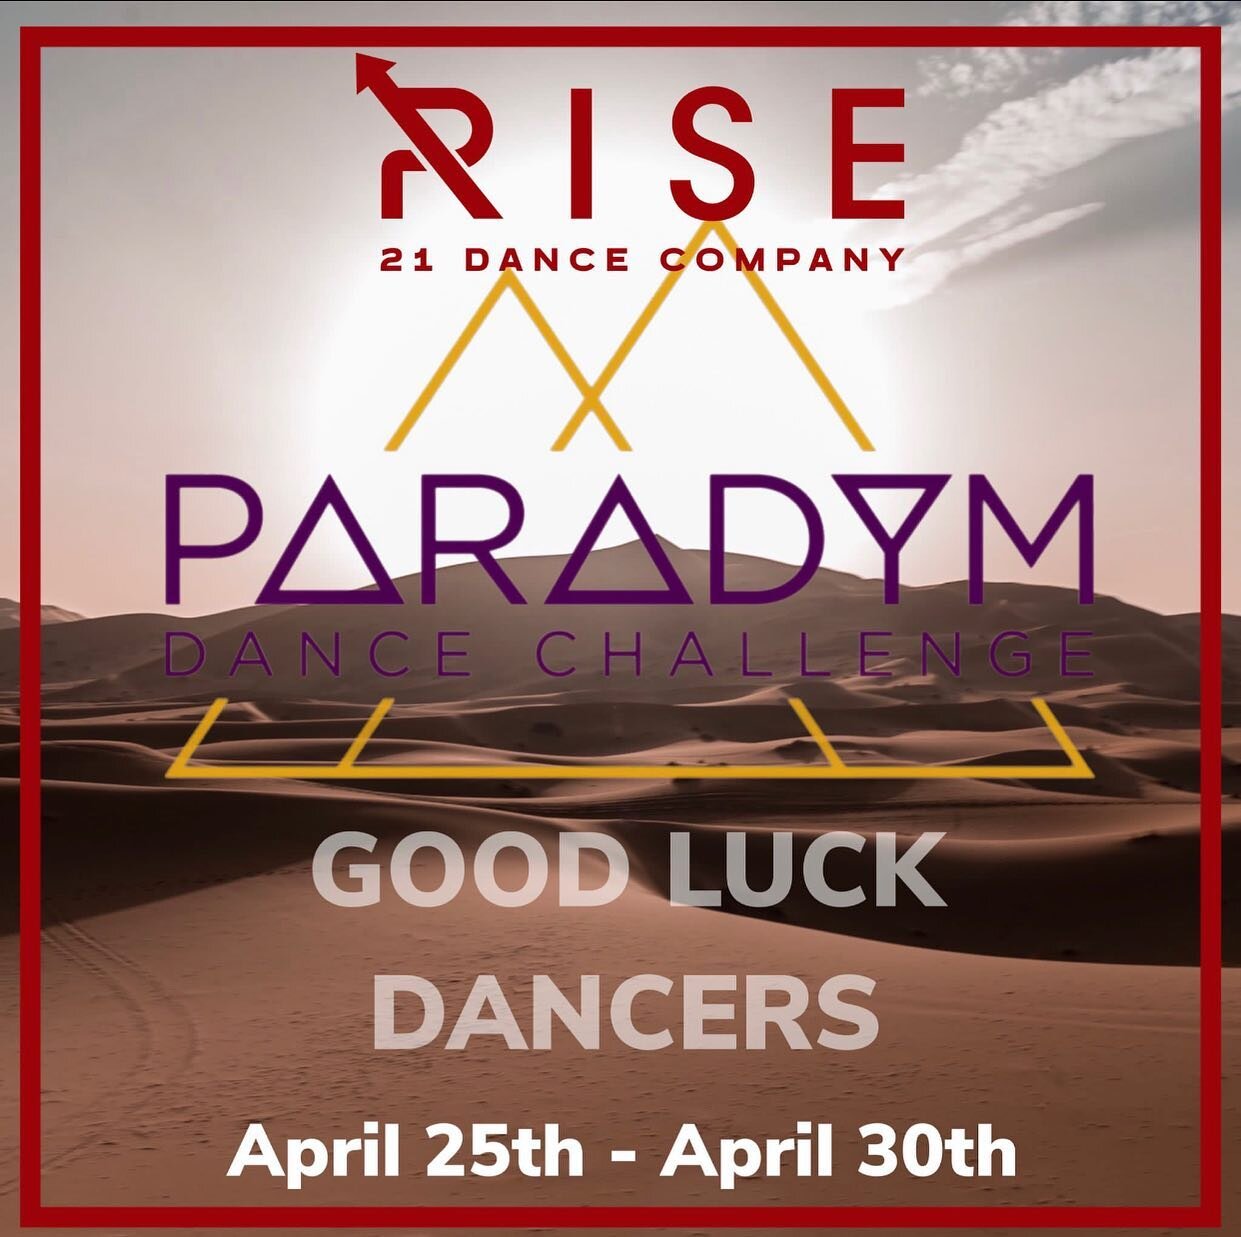 Best of luck to our dancers and all participating studios ! @paradymdancechallenge #letsgo